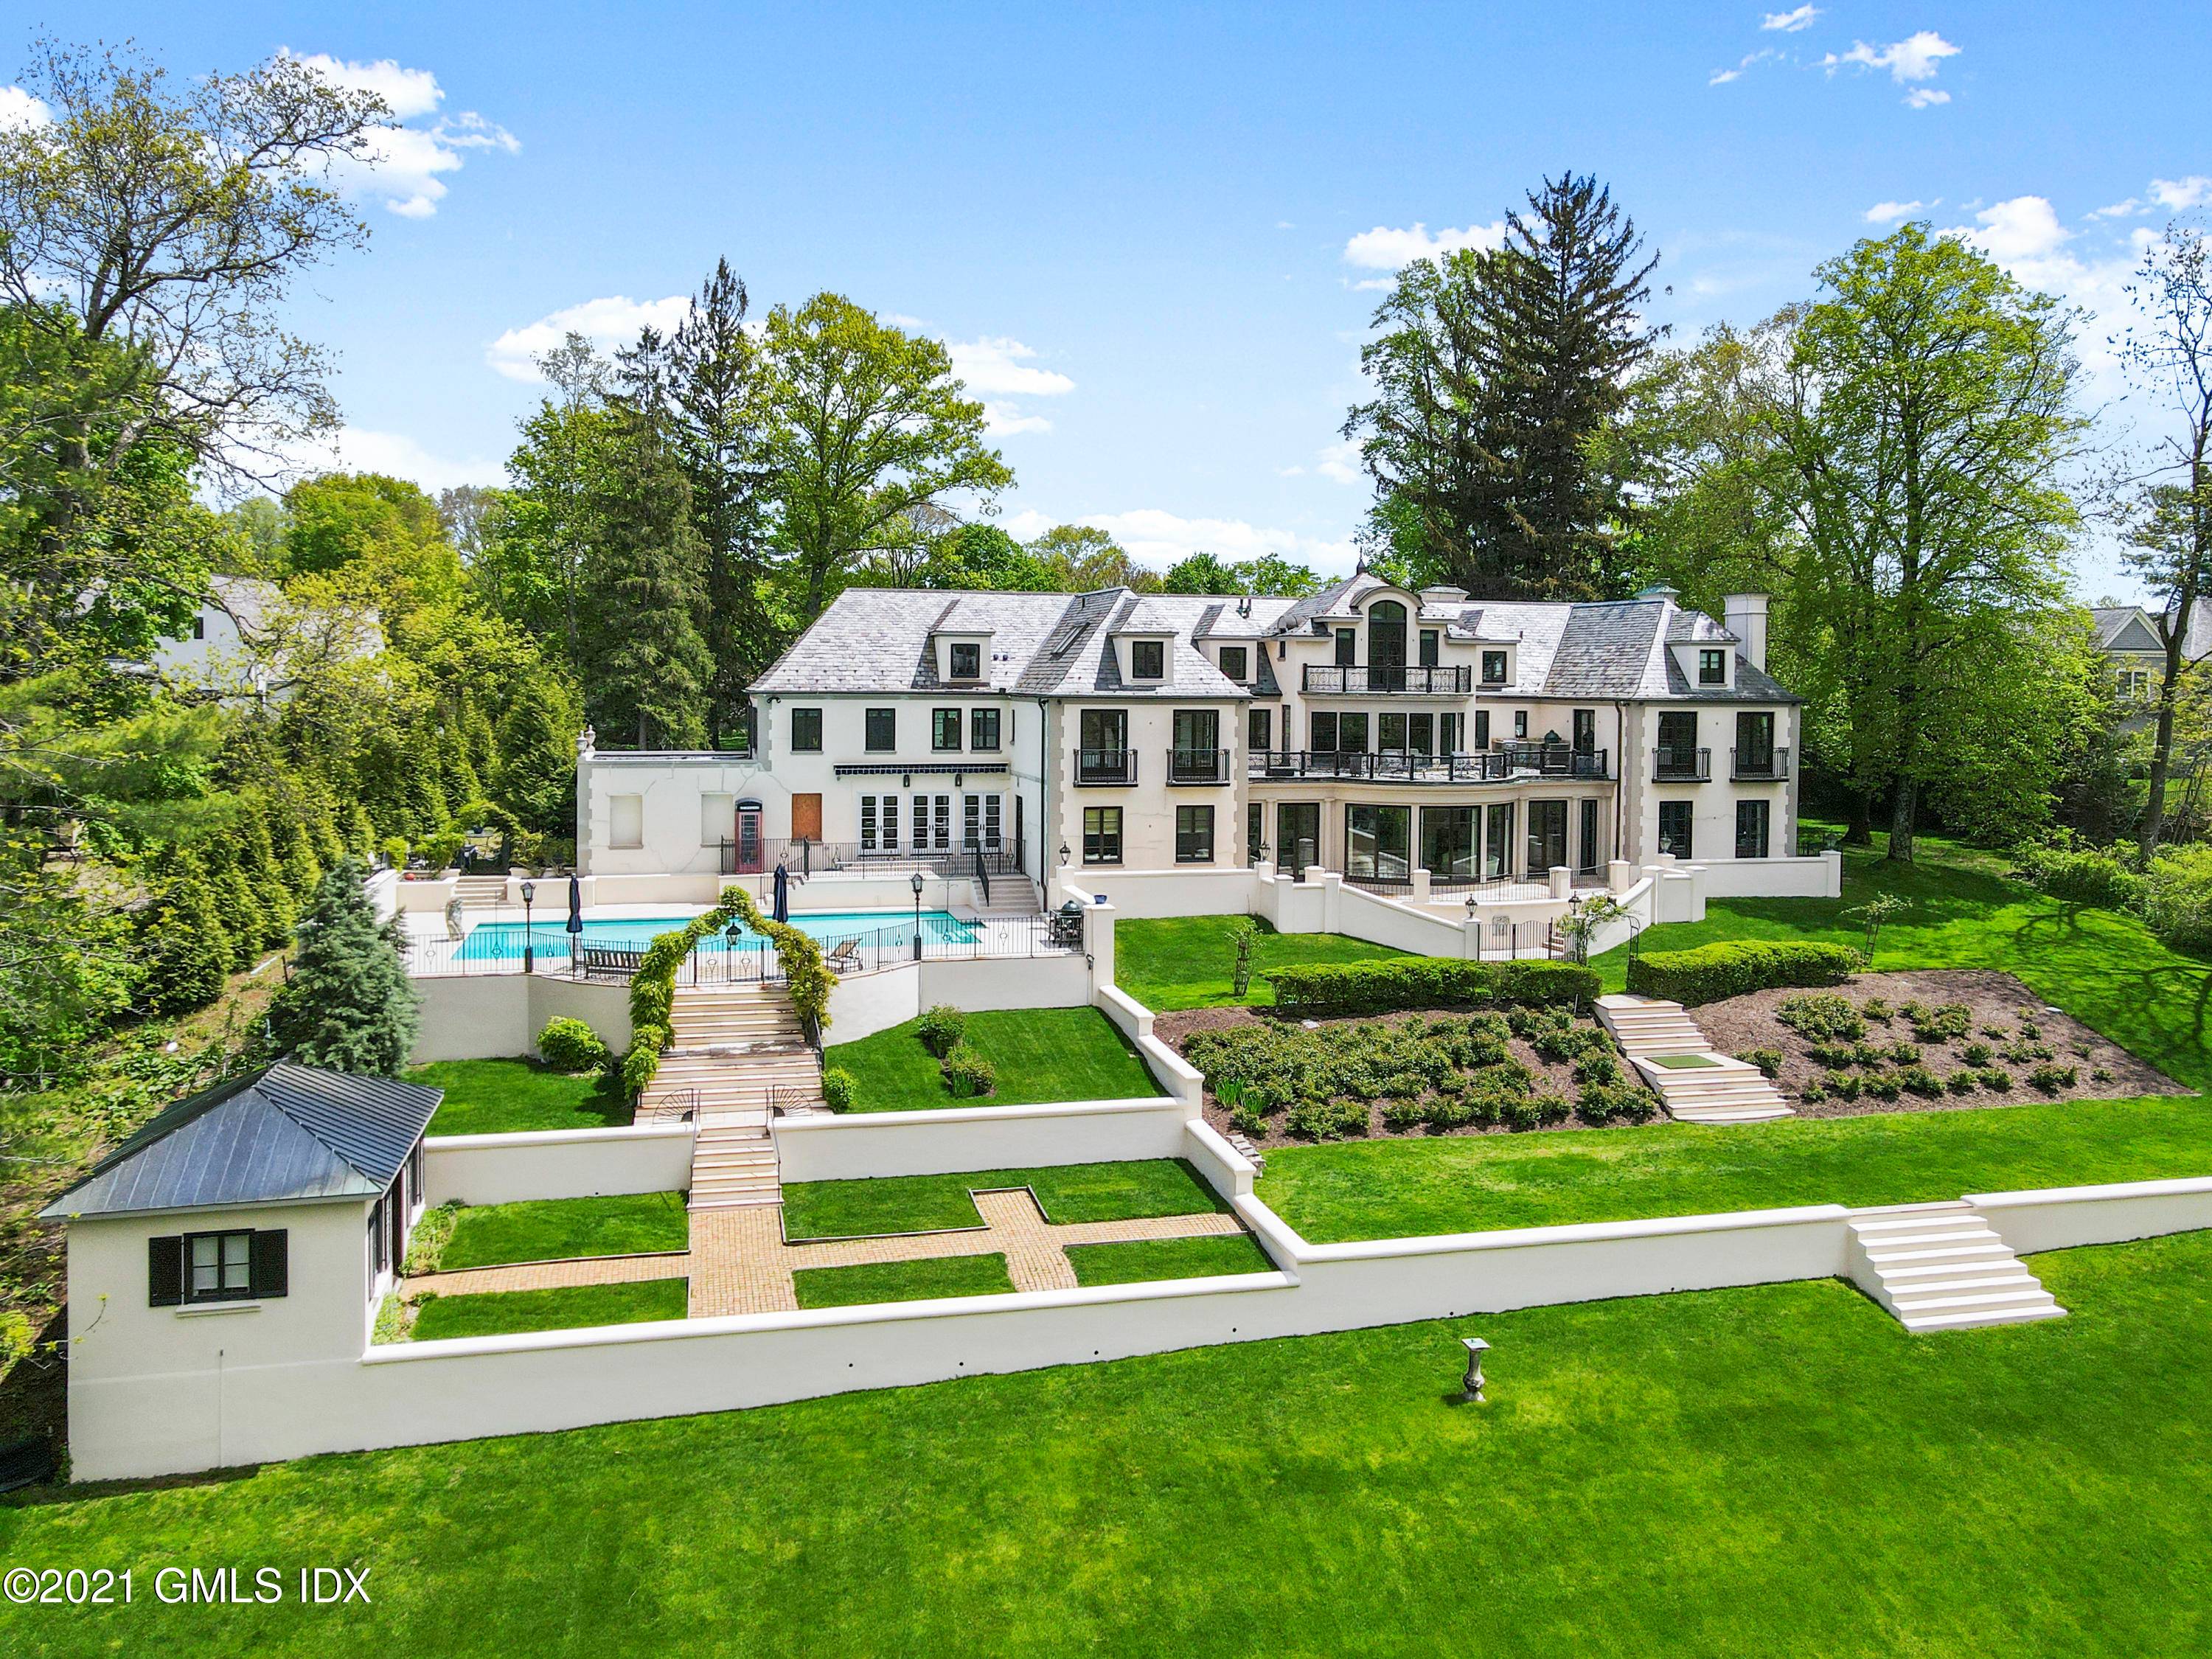 Amazing multi year renovation of a 1928 10, 000 sq ft French country manor with a back country feel located on a scenic lane just 1.